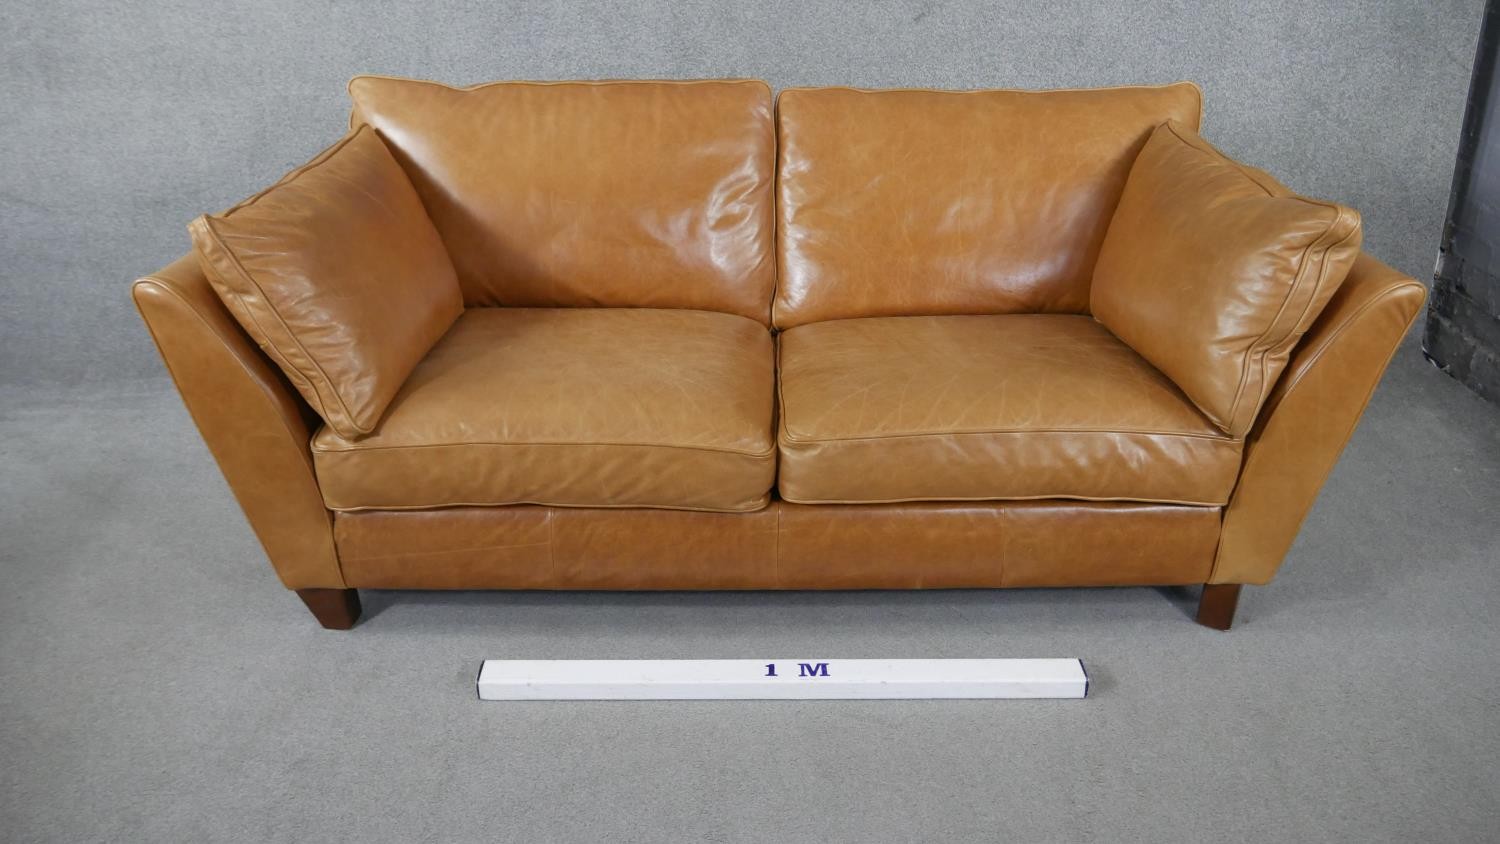 An Art Deco style two seater sofa in light tan leather upholstery. H.84 W.179 D.97cm - Image 5 of 5